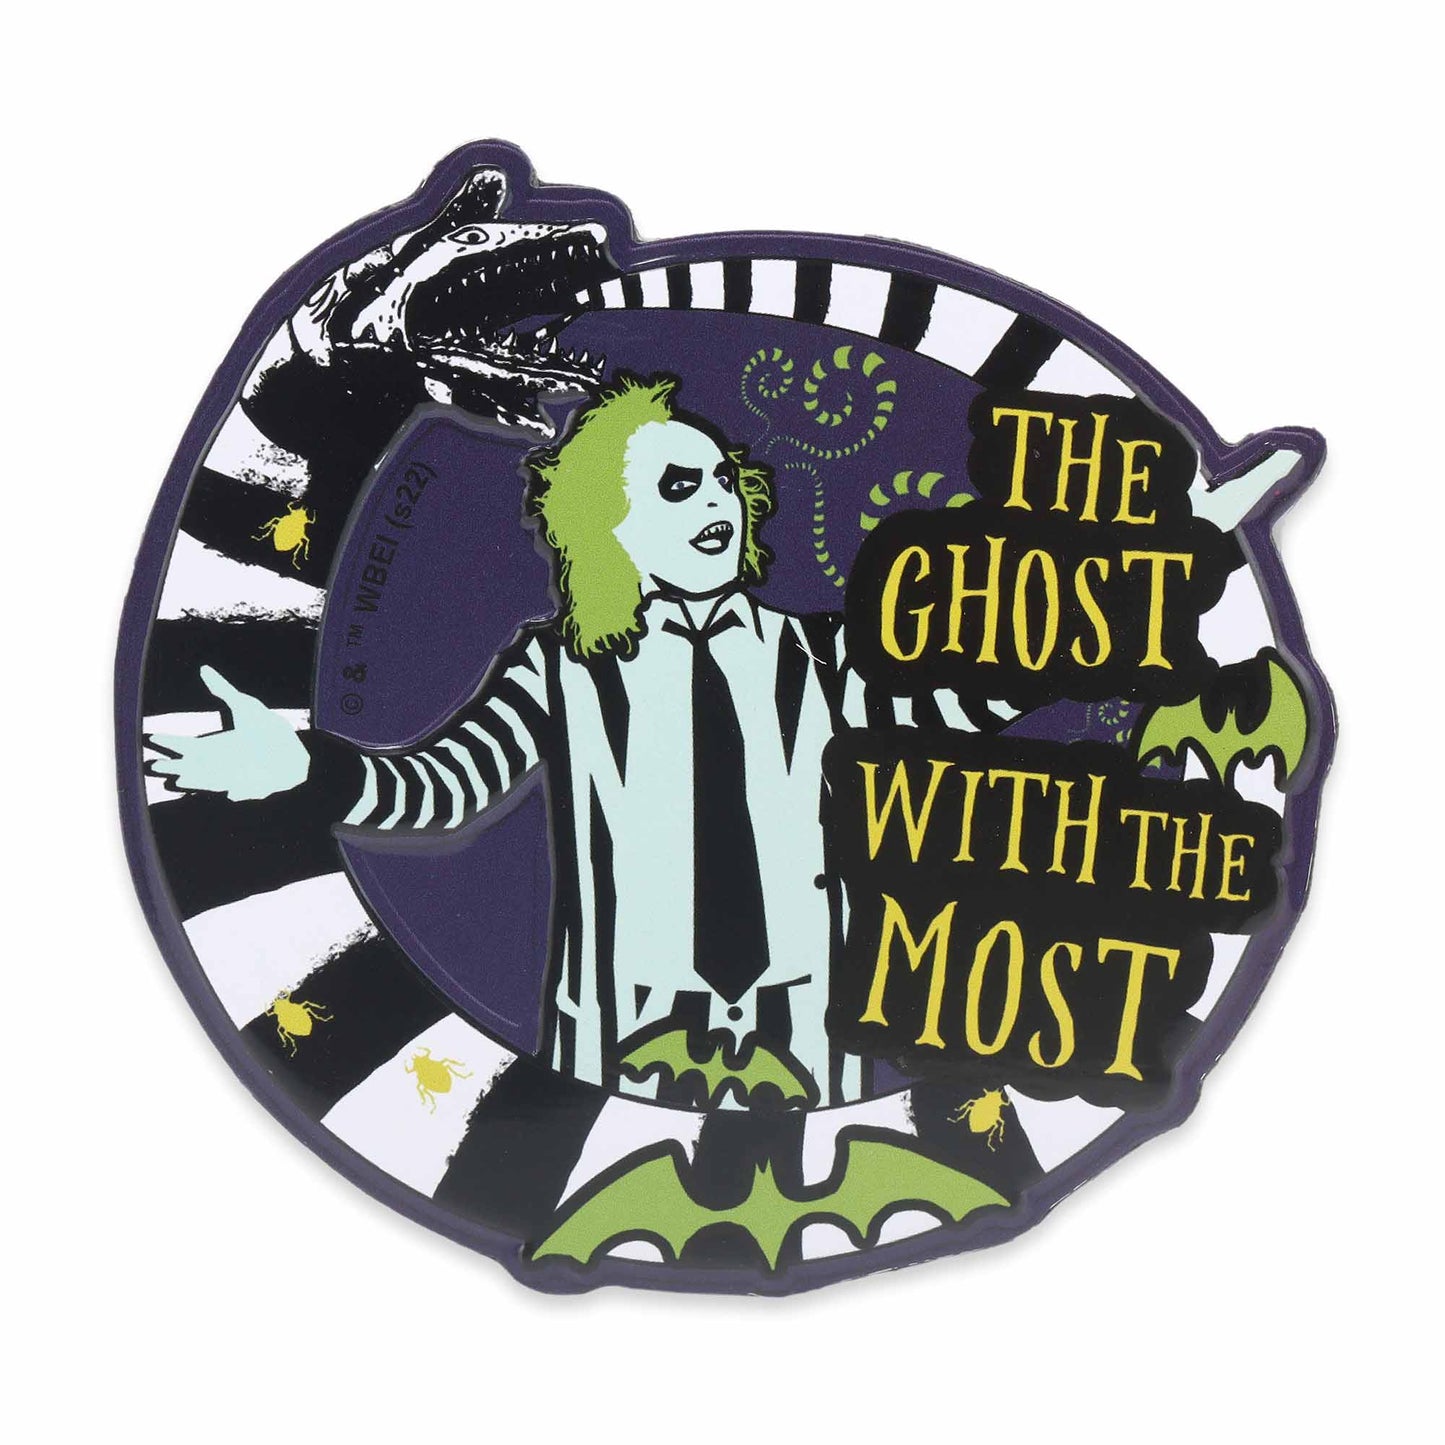 Beetlejuice Ghost with the Most Metal Magnet